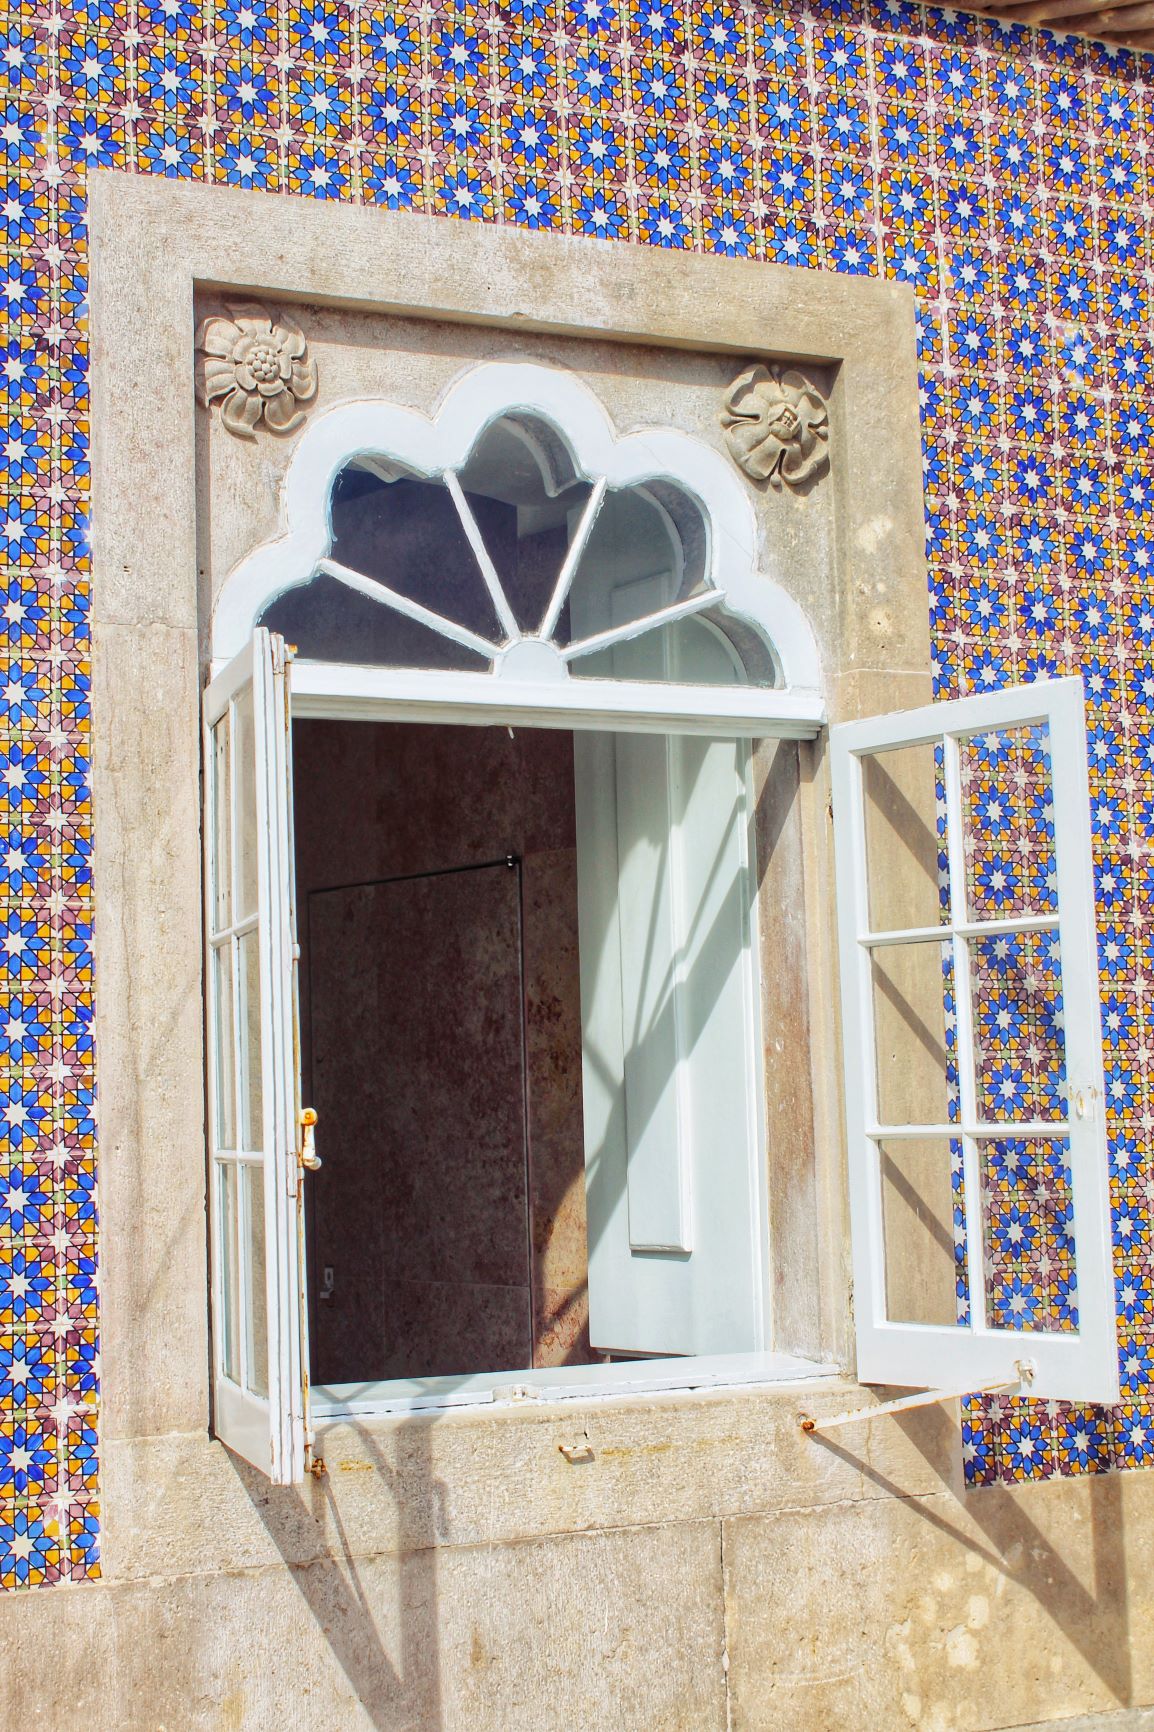 open window with tiles at Pena Palace Sintra